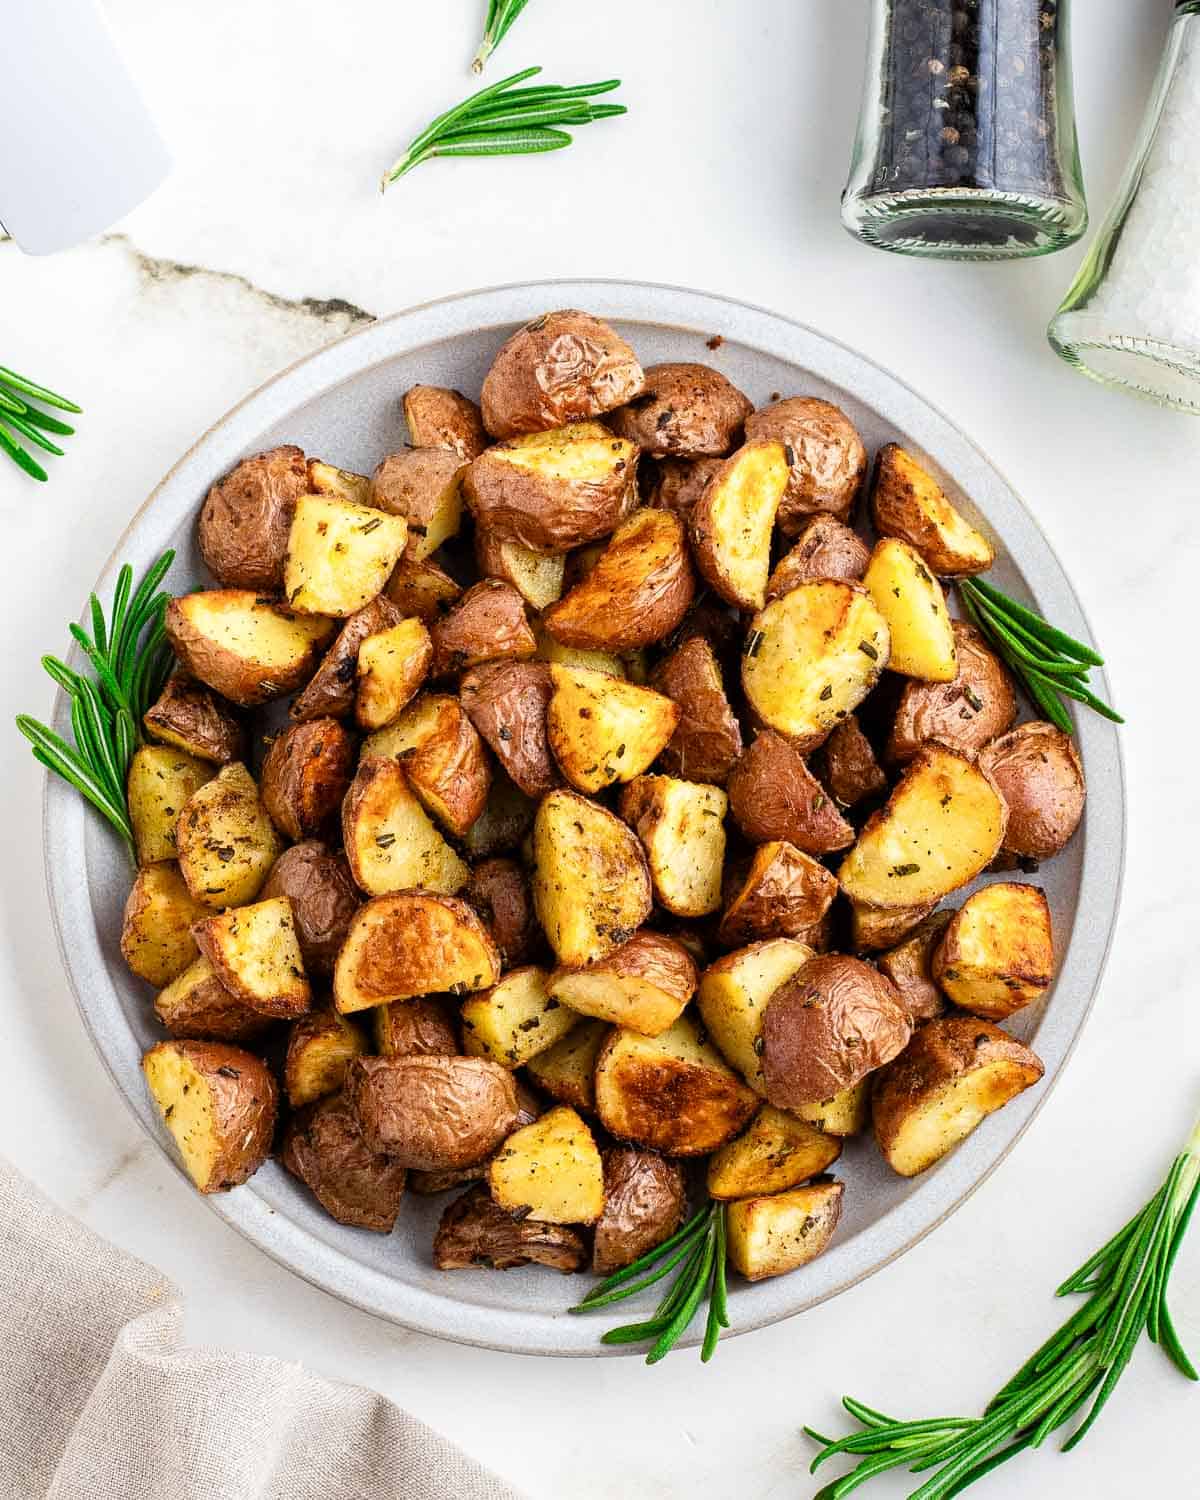 Roasted air fryer red potatoes on a white plate garnished with fresh rosemary.